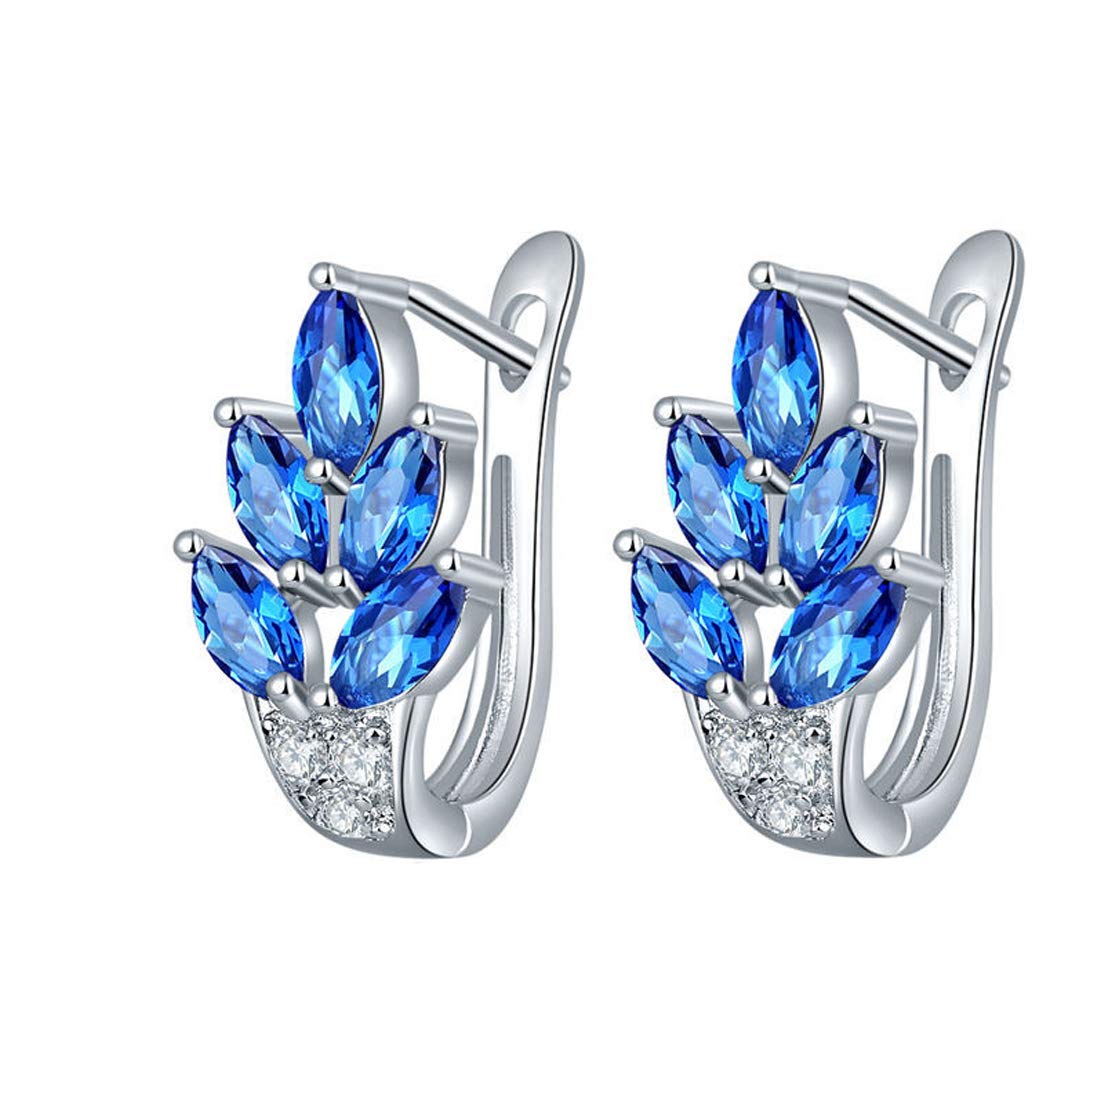 Yellow Chimes Clip on Earrings for Women Blue Crystal Earrings Leafy Fashion Rhodium Plated Crystal Clip On Earrings for Women and Girls.